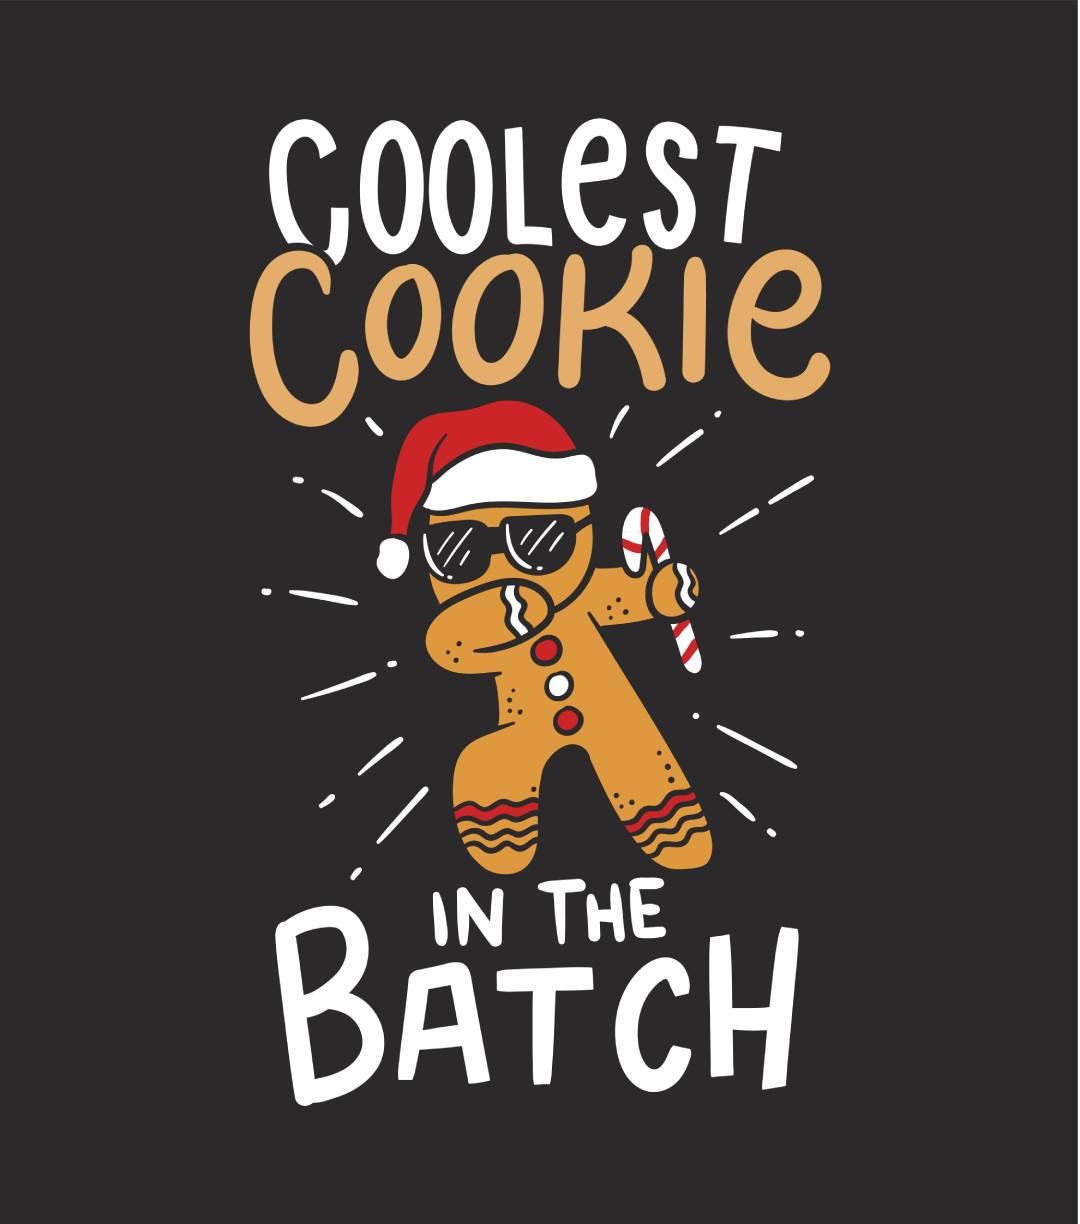 Coolest Cookie In The Batch Gingerbread Ch Men's Classic T-Shirt